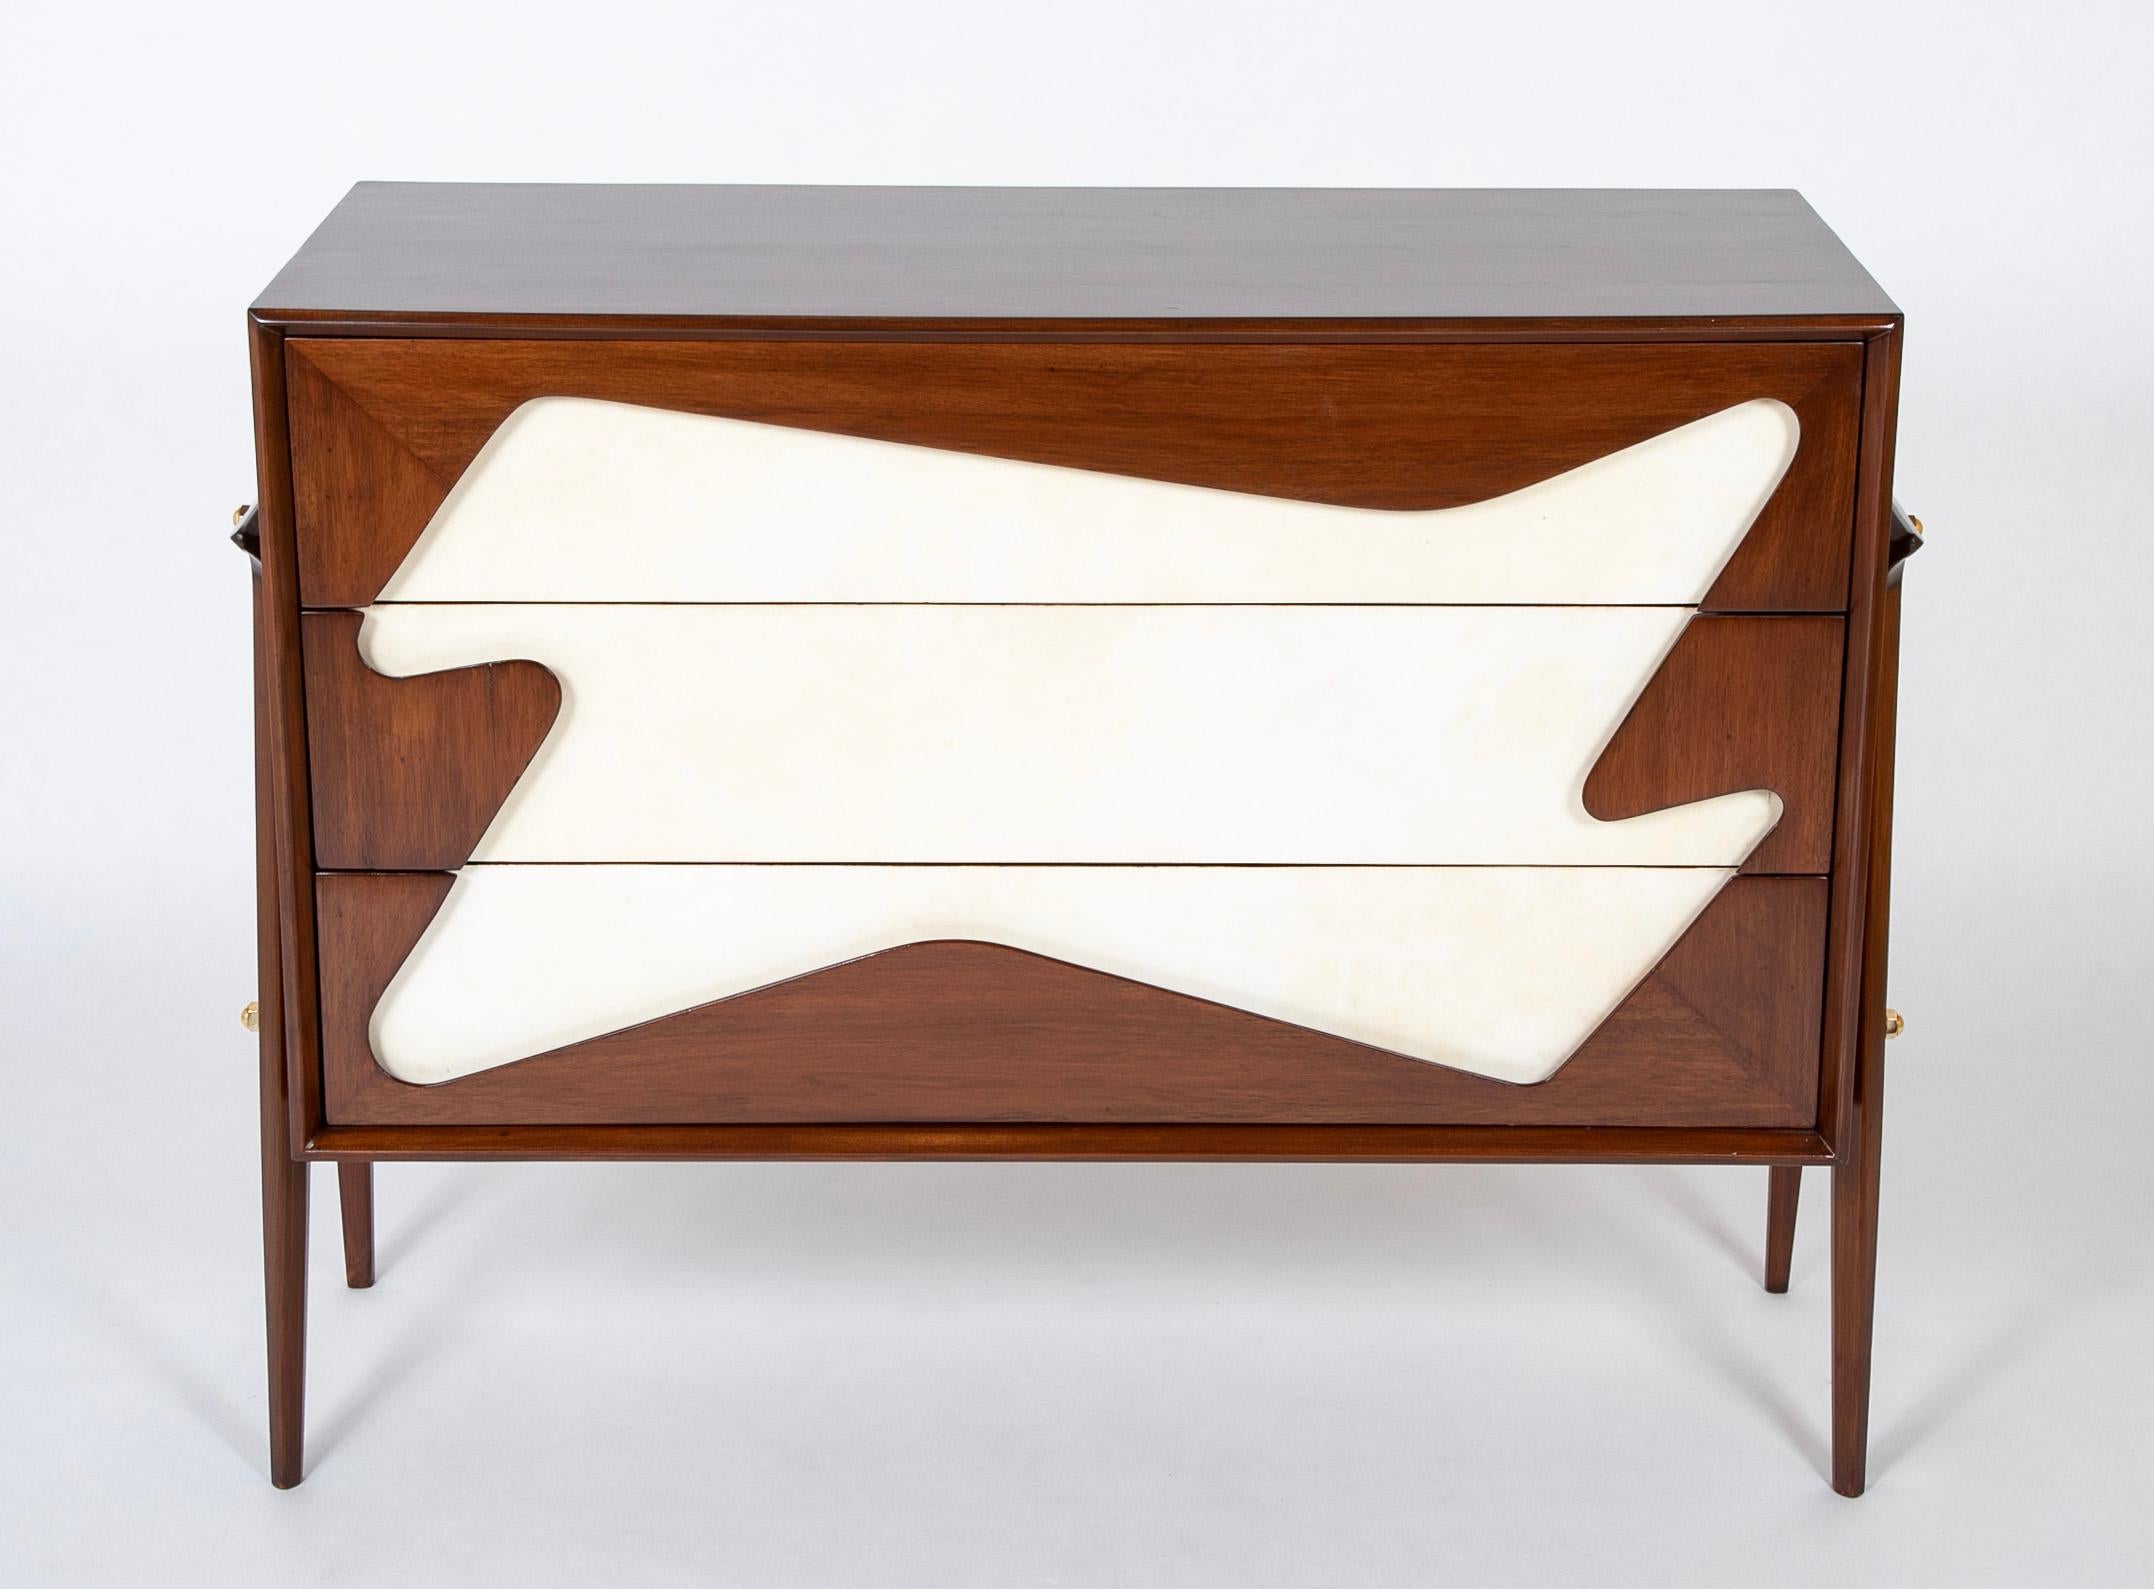 An Italian mid-century three drawer dresser in the manner of Gio Ponti's chests for the Royal Hotel.   The chest is walnut with free form parchment design to the front.  Circa 1955.